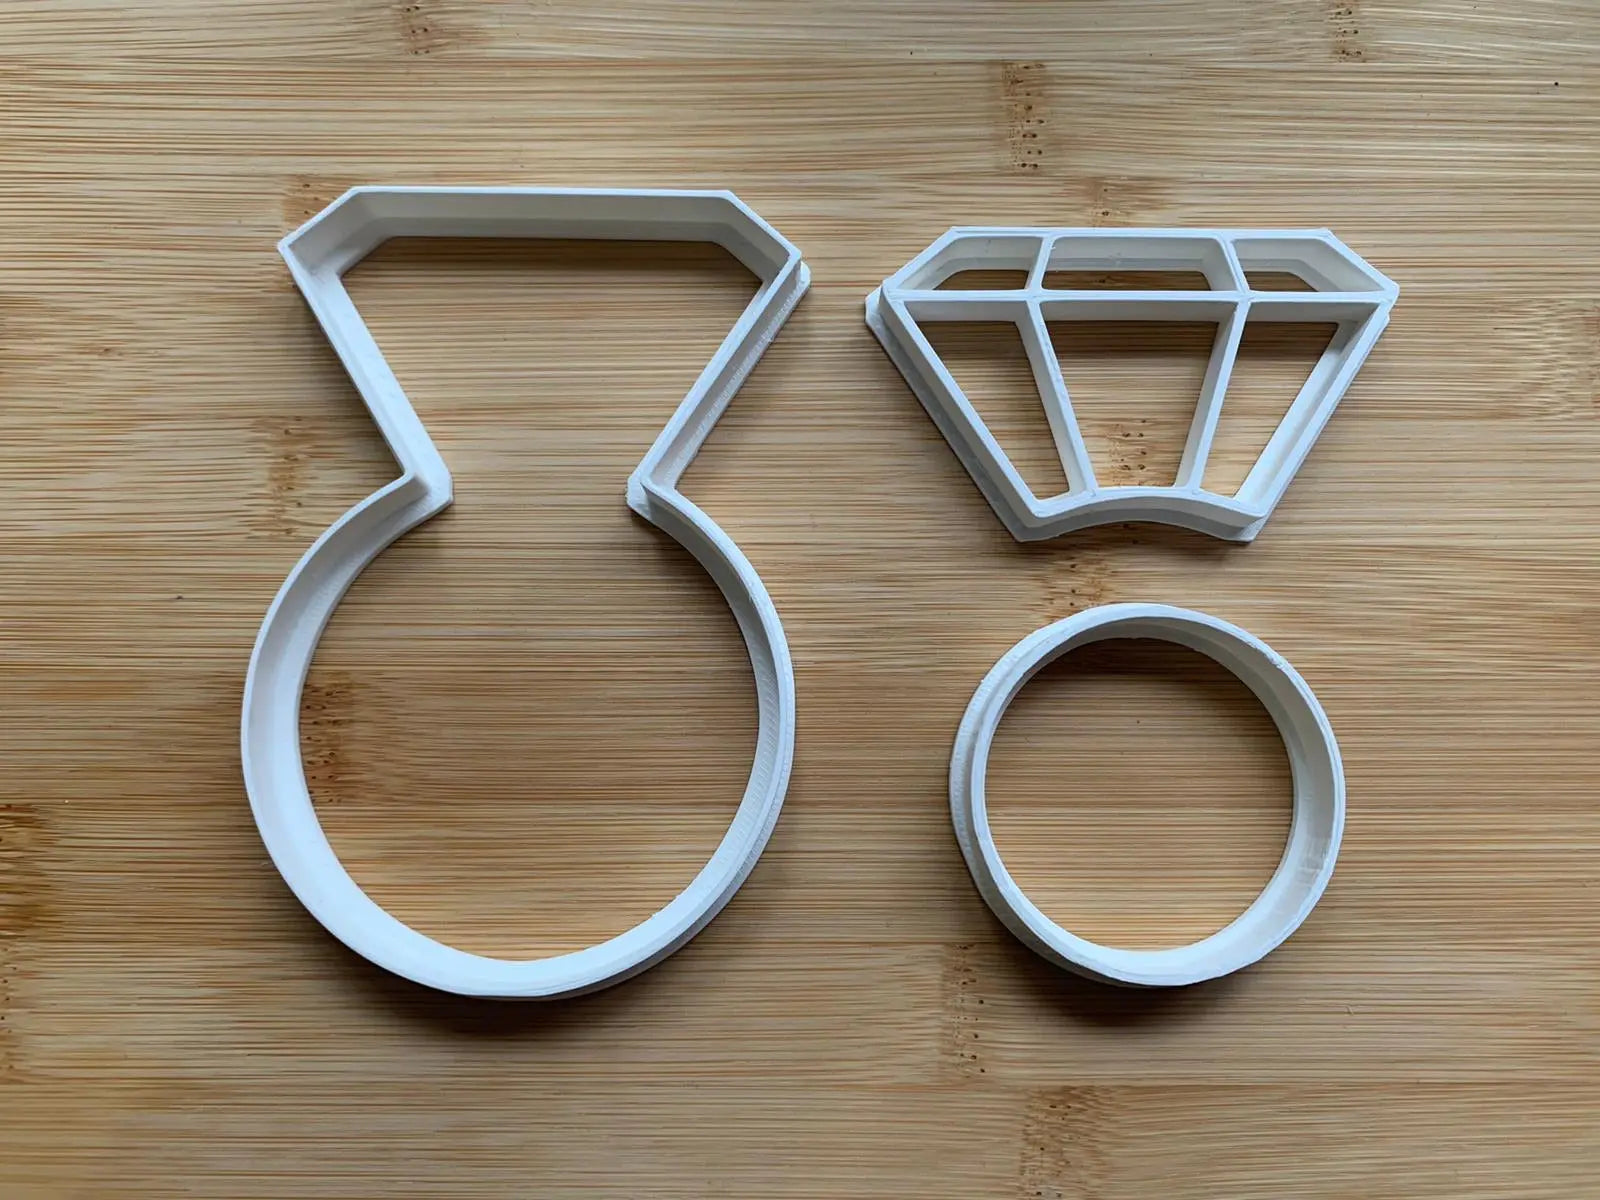 Ring Cookie Cutter fondant cake decorating MEG cookie cutters